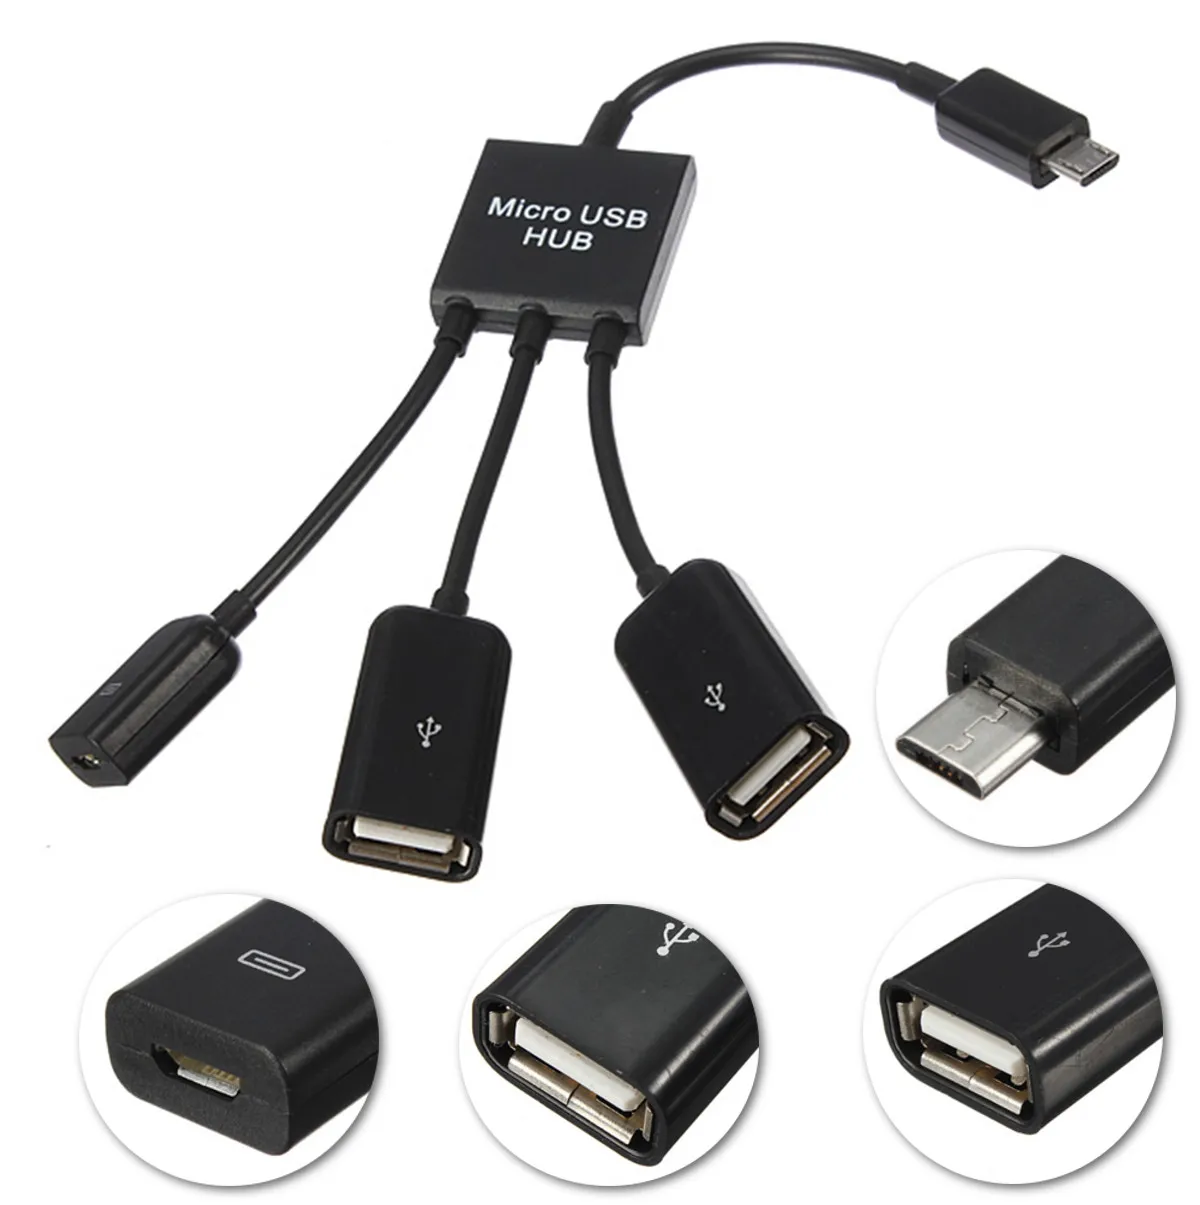 

3 in 1 Micro USB Dual Host OTG Charge Hub Cord Adapter Splitter for Android Smartphones Tablet Black Cable